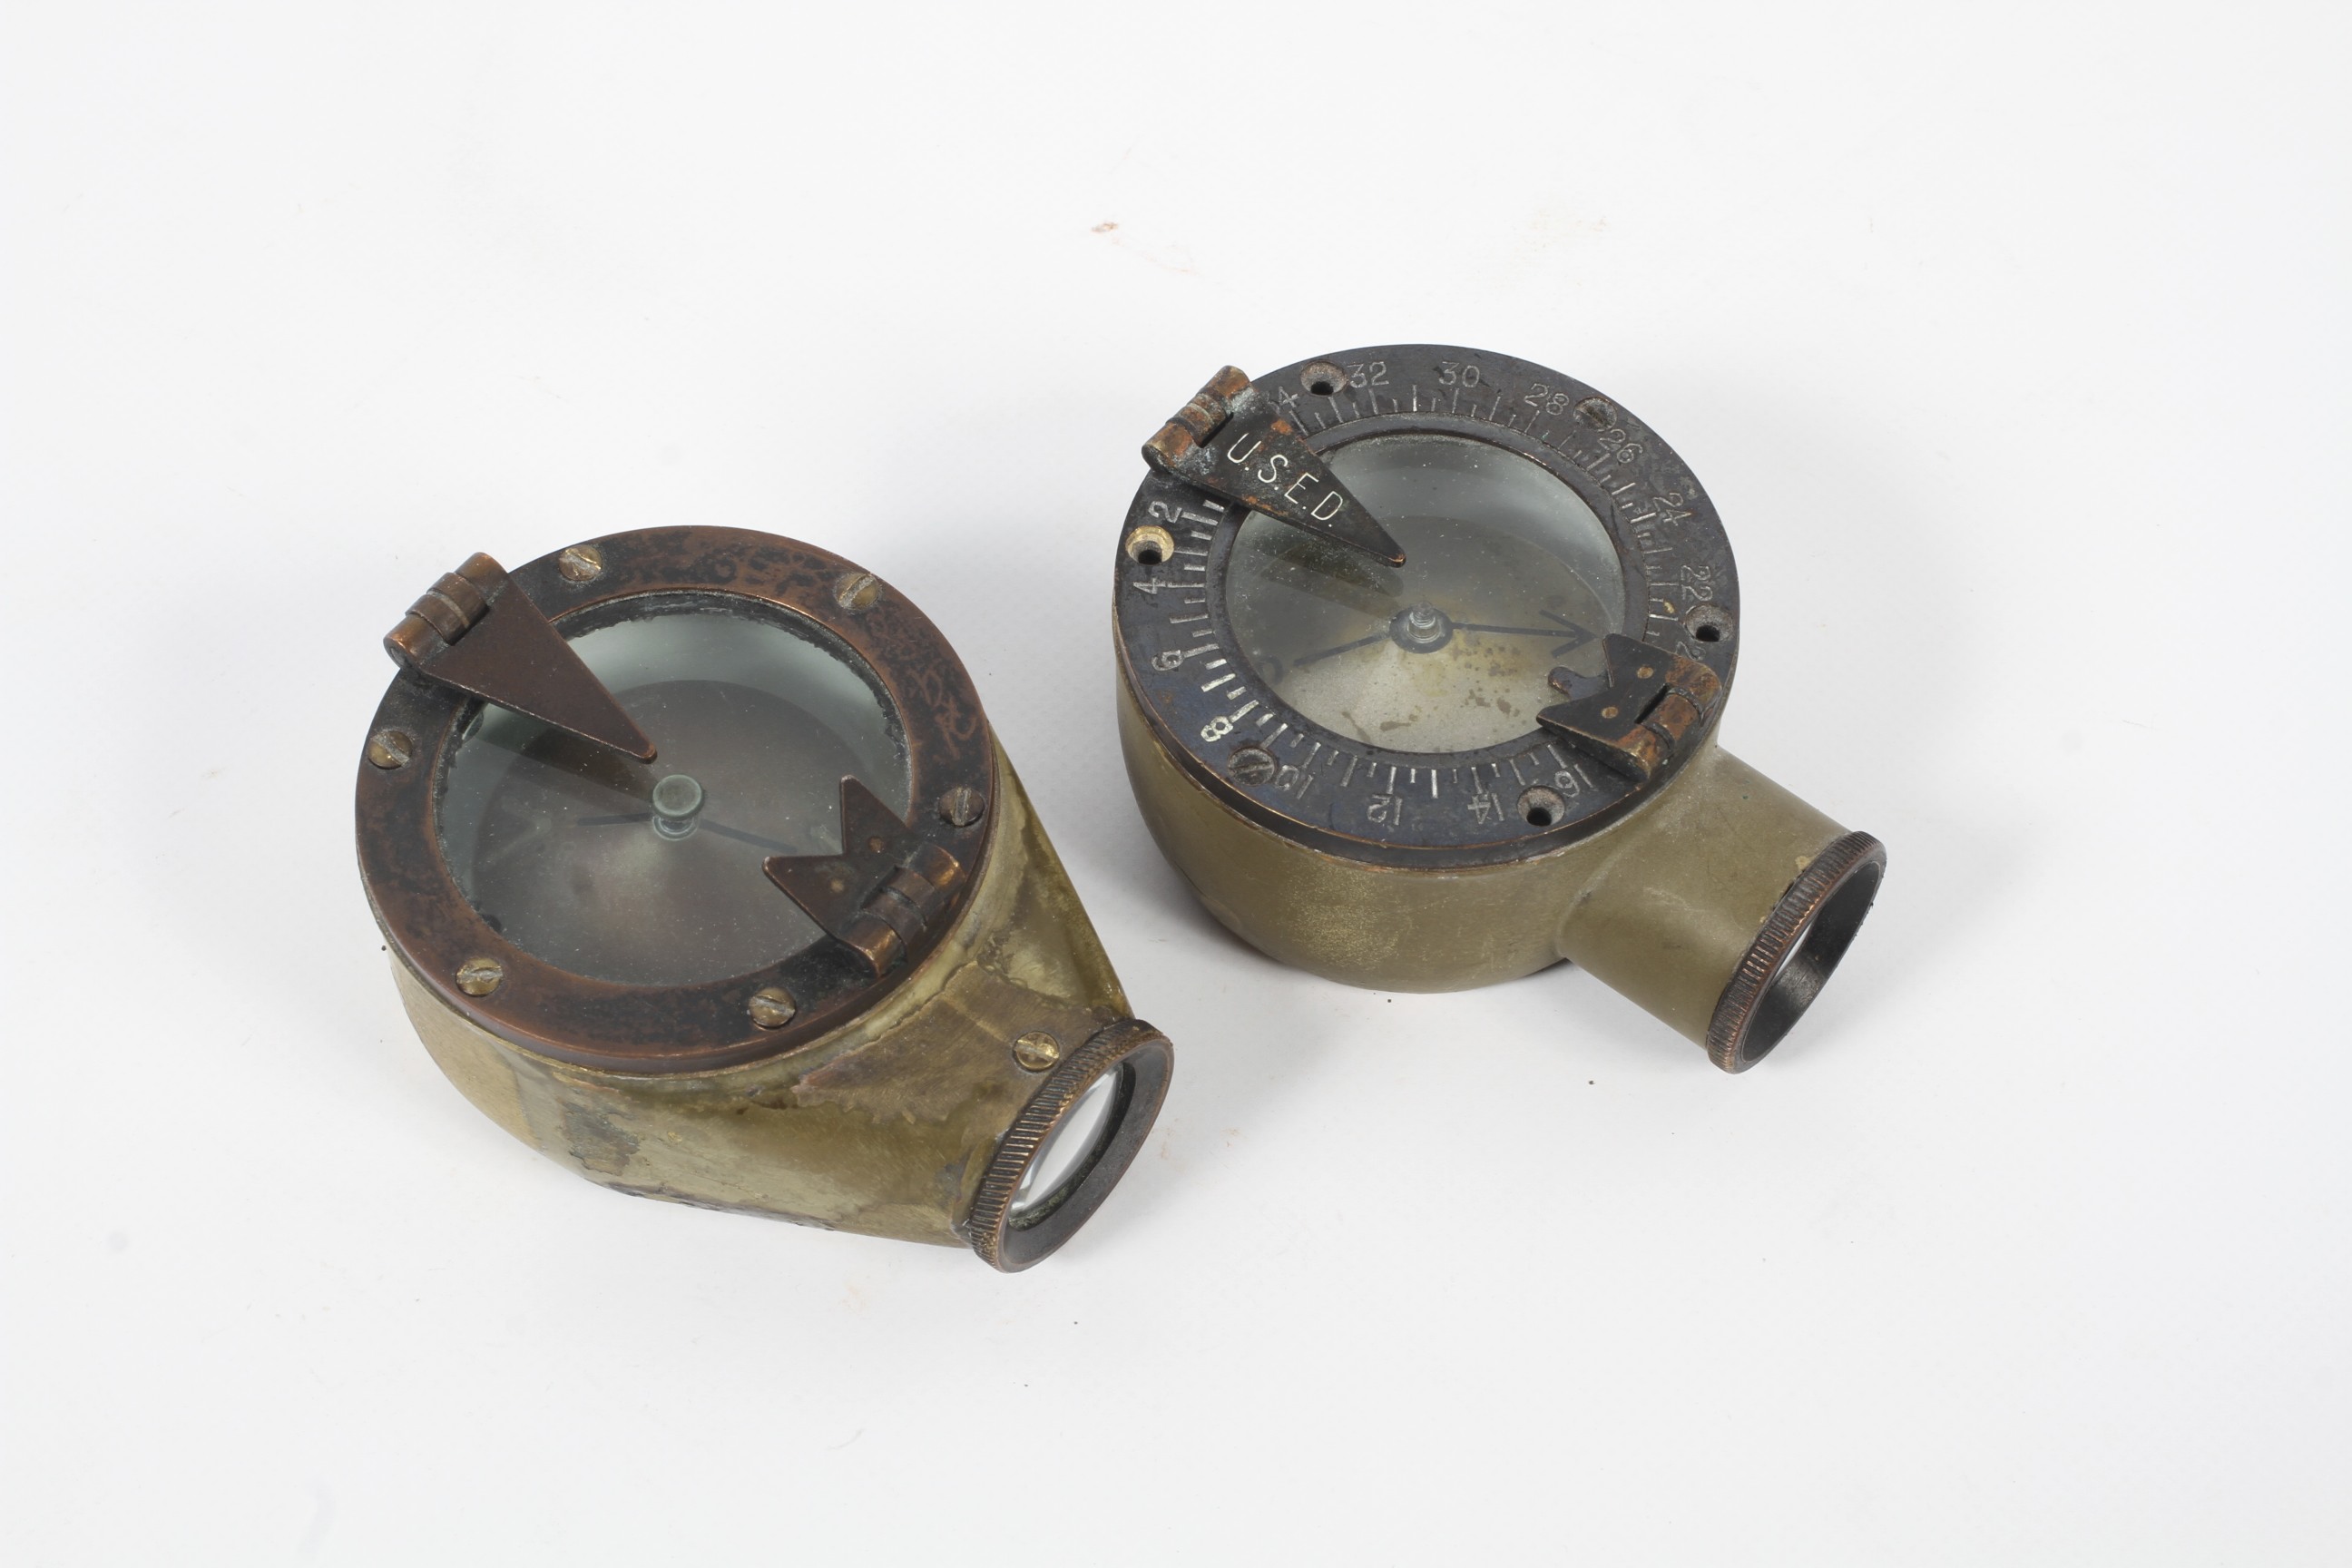 Two WWI period Creach-Osbourne handheld marching compasses. Made by the Sperry Gyroscope Co.